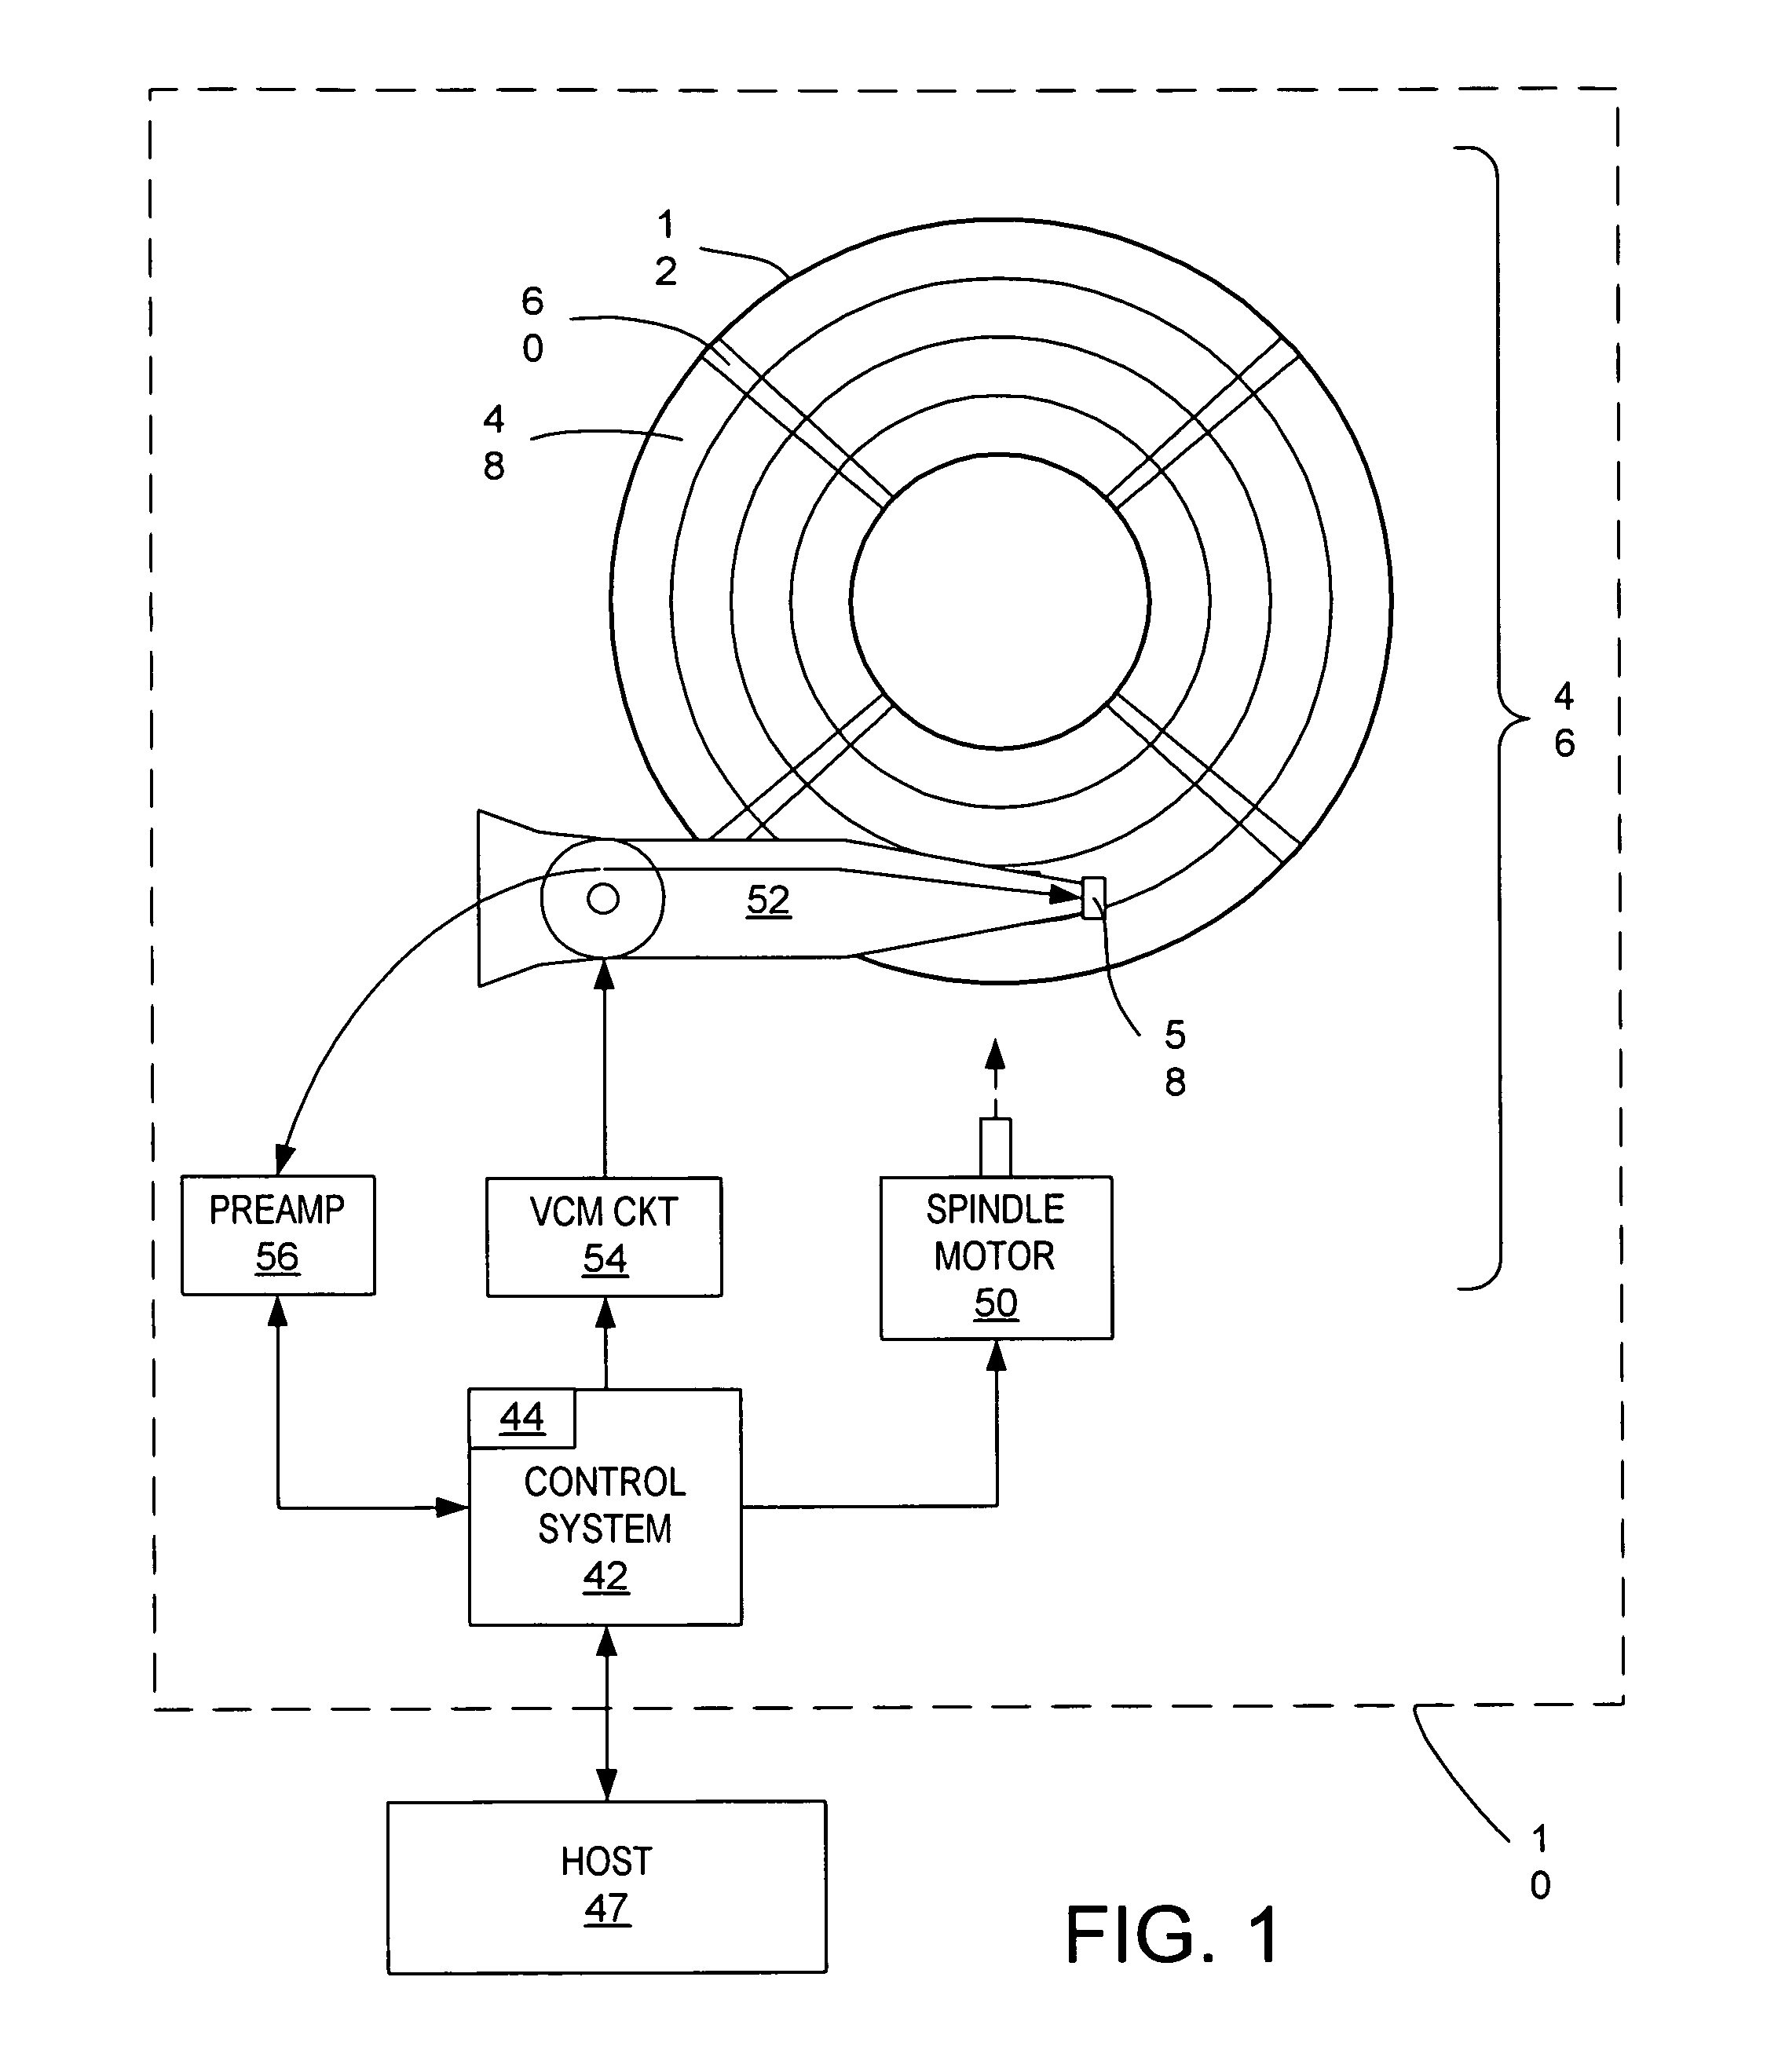 Magnetic disk having efficiently stored WRRO compensation value redundancy information and method for using the redundancy information